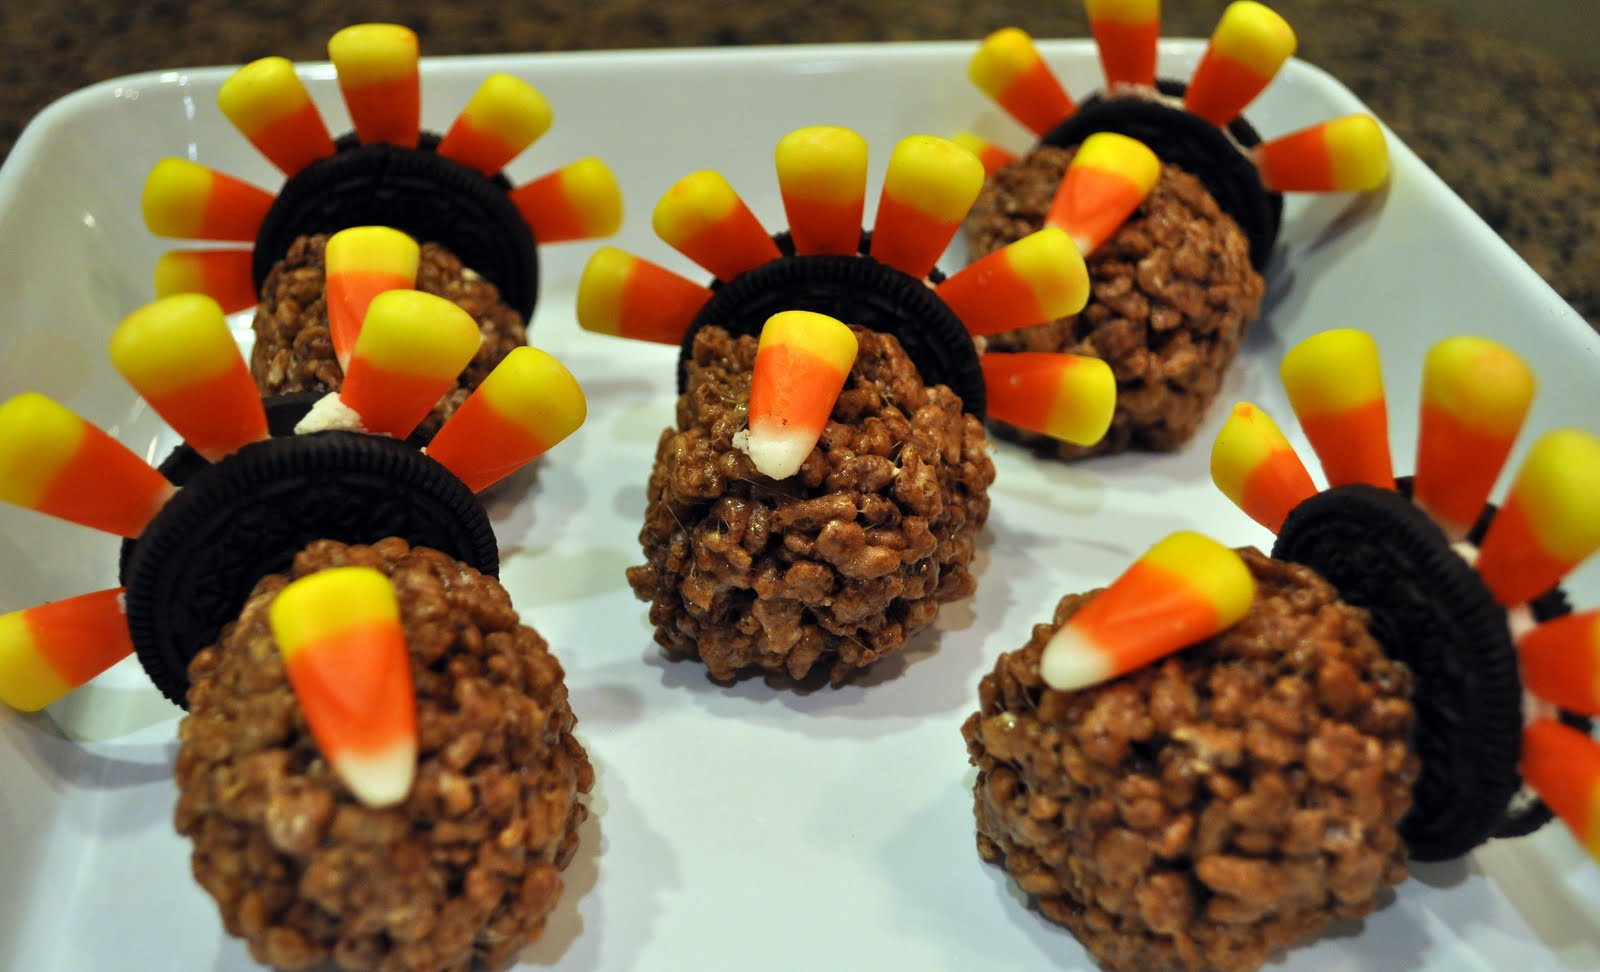 Easy To Make Thanksgiving Desserts
 3 sisters clip n coupons & sharing recipes Thanksgiving